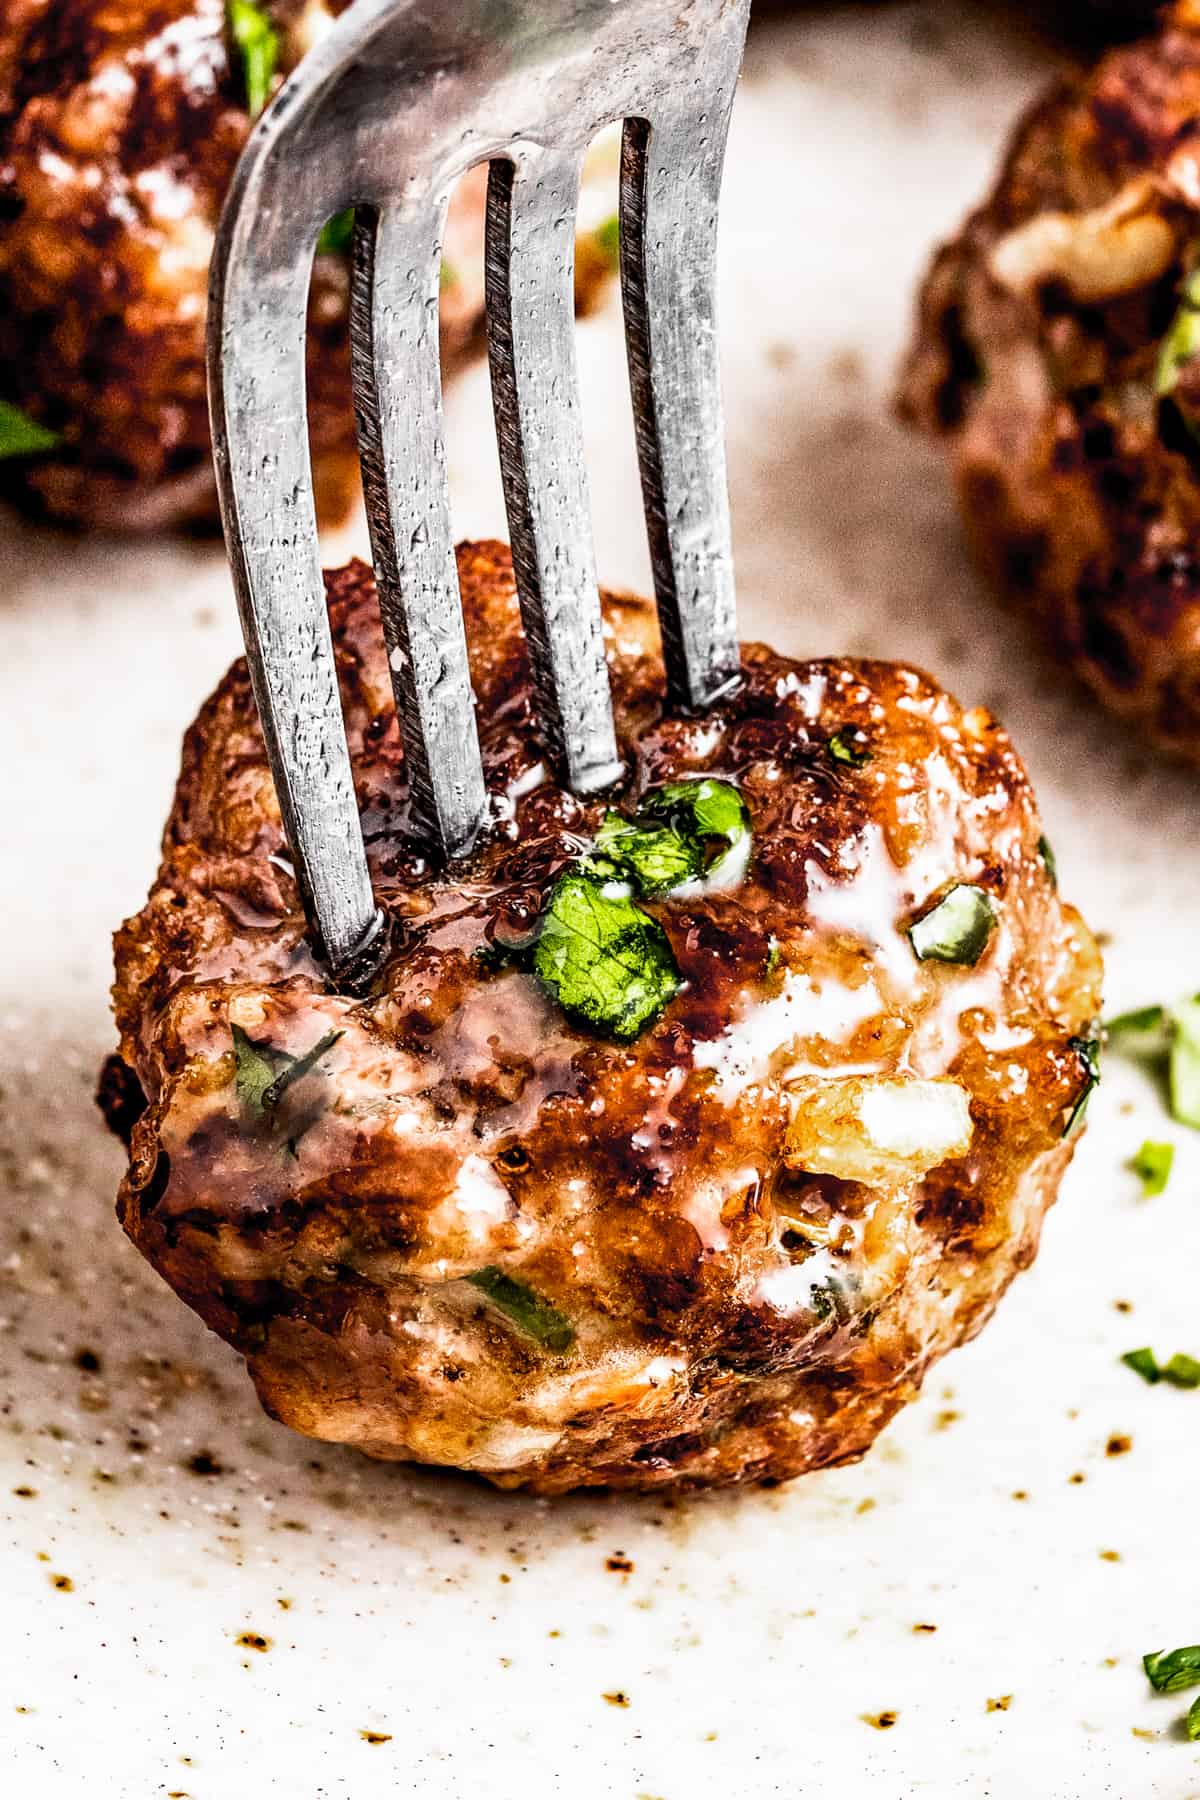 A fork piercing an air fryer meatball served on a plate with other meatballs.